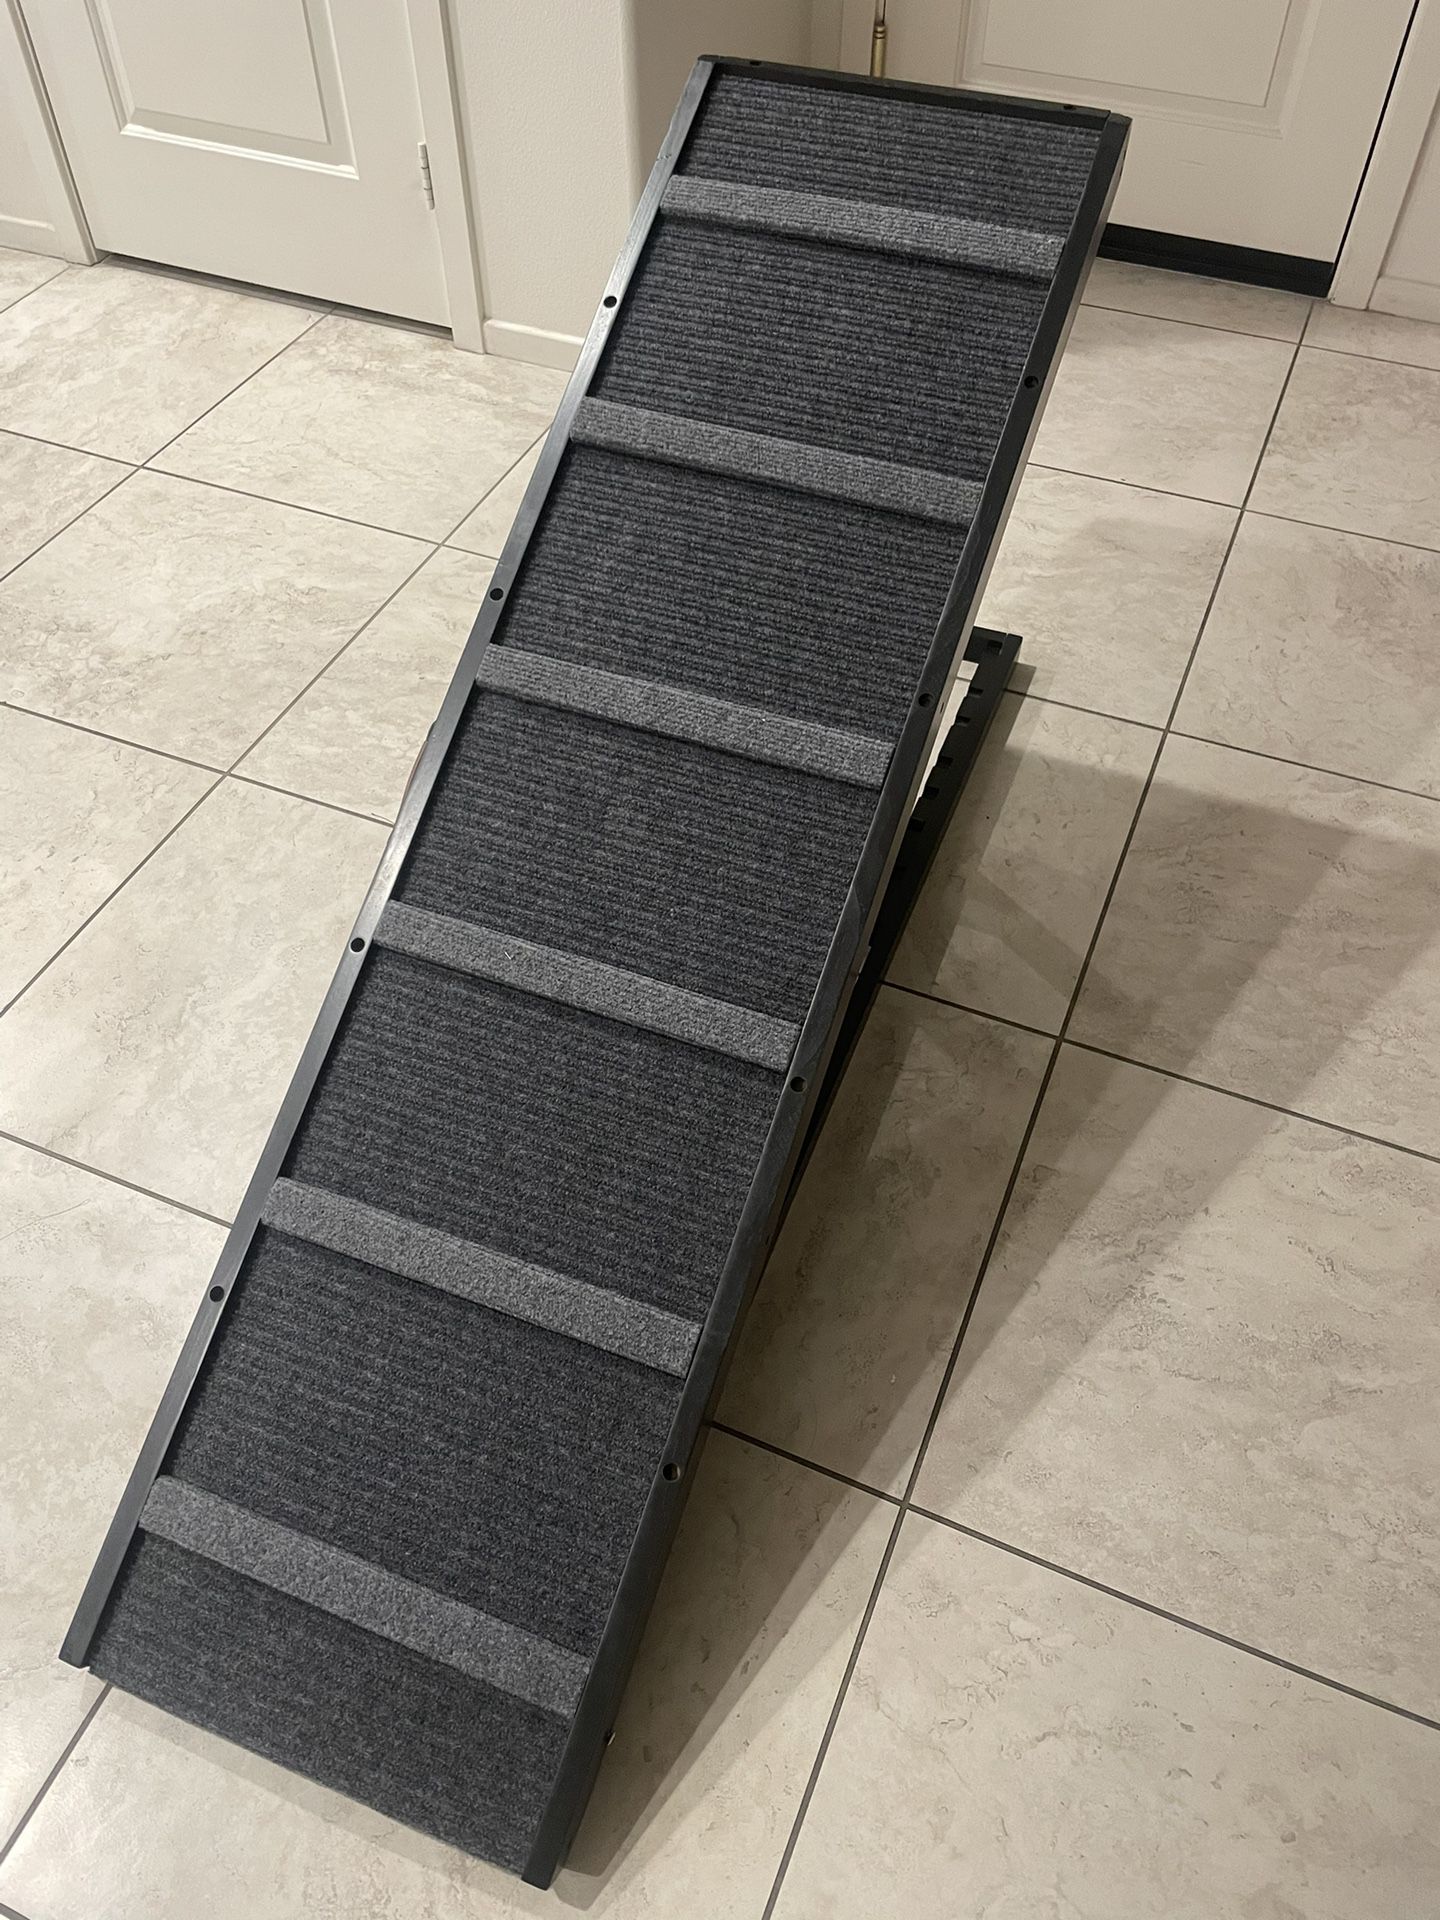 Big size 58 in PETS Dog Ramp for Bed - Portable Ramp for Dogs, Folding Dog Ramp for All Breeds - Adjustable Wooden Dog Ramp for Couch, Car or Sofa